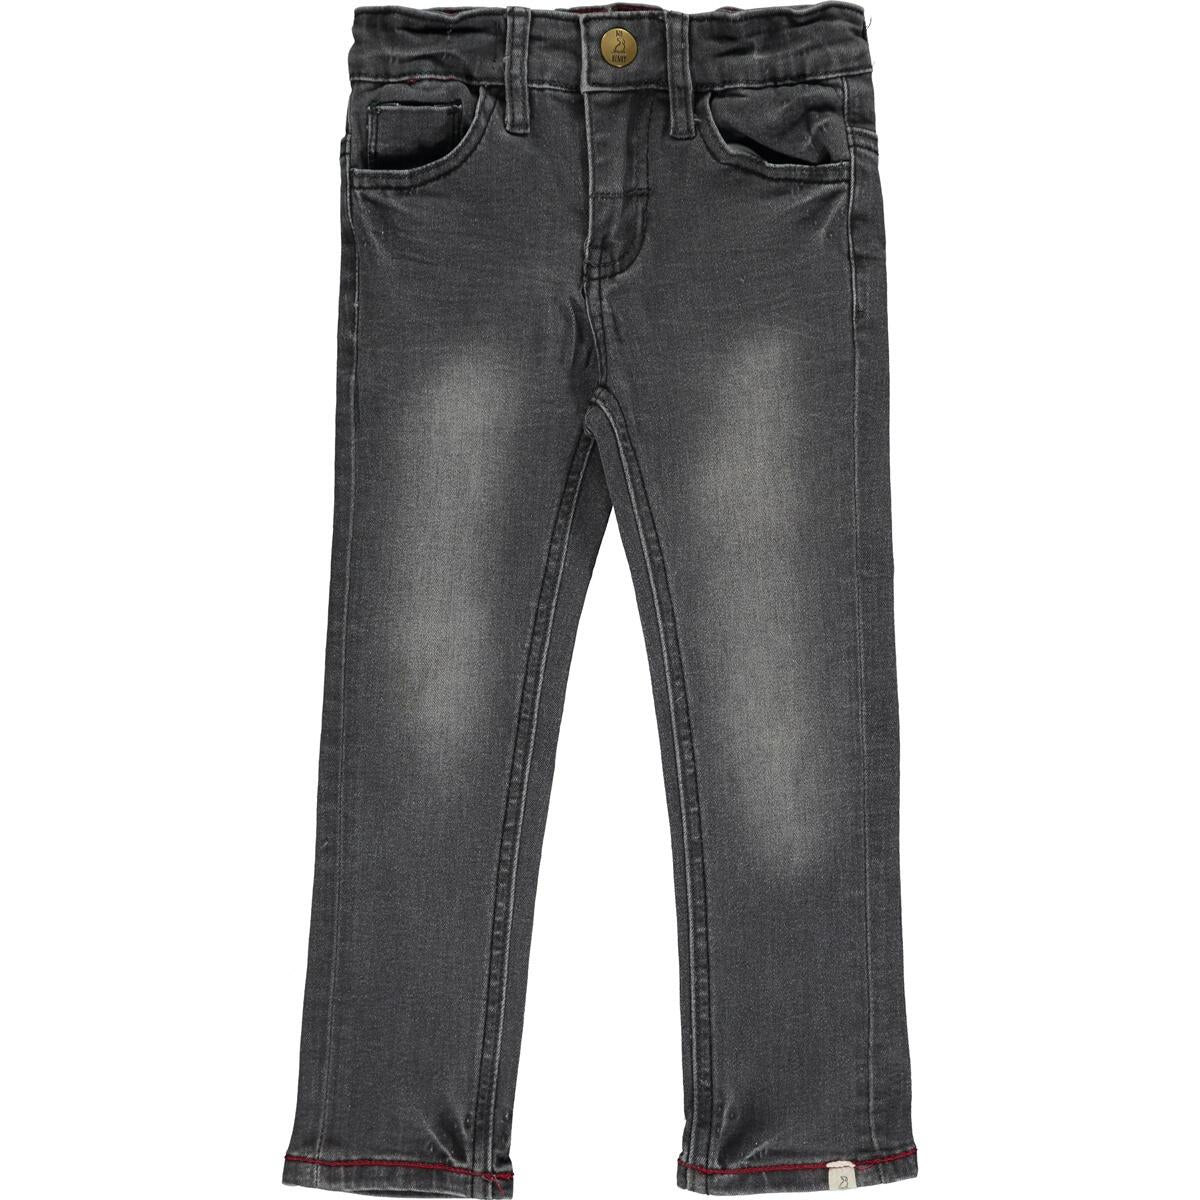 Baby Denim Jeans : Charcoal